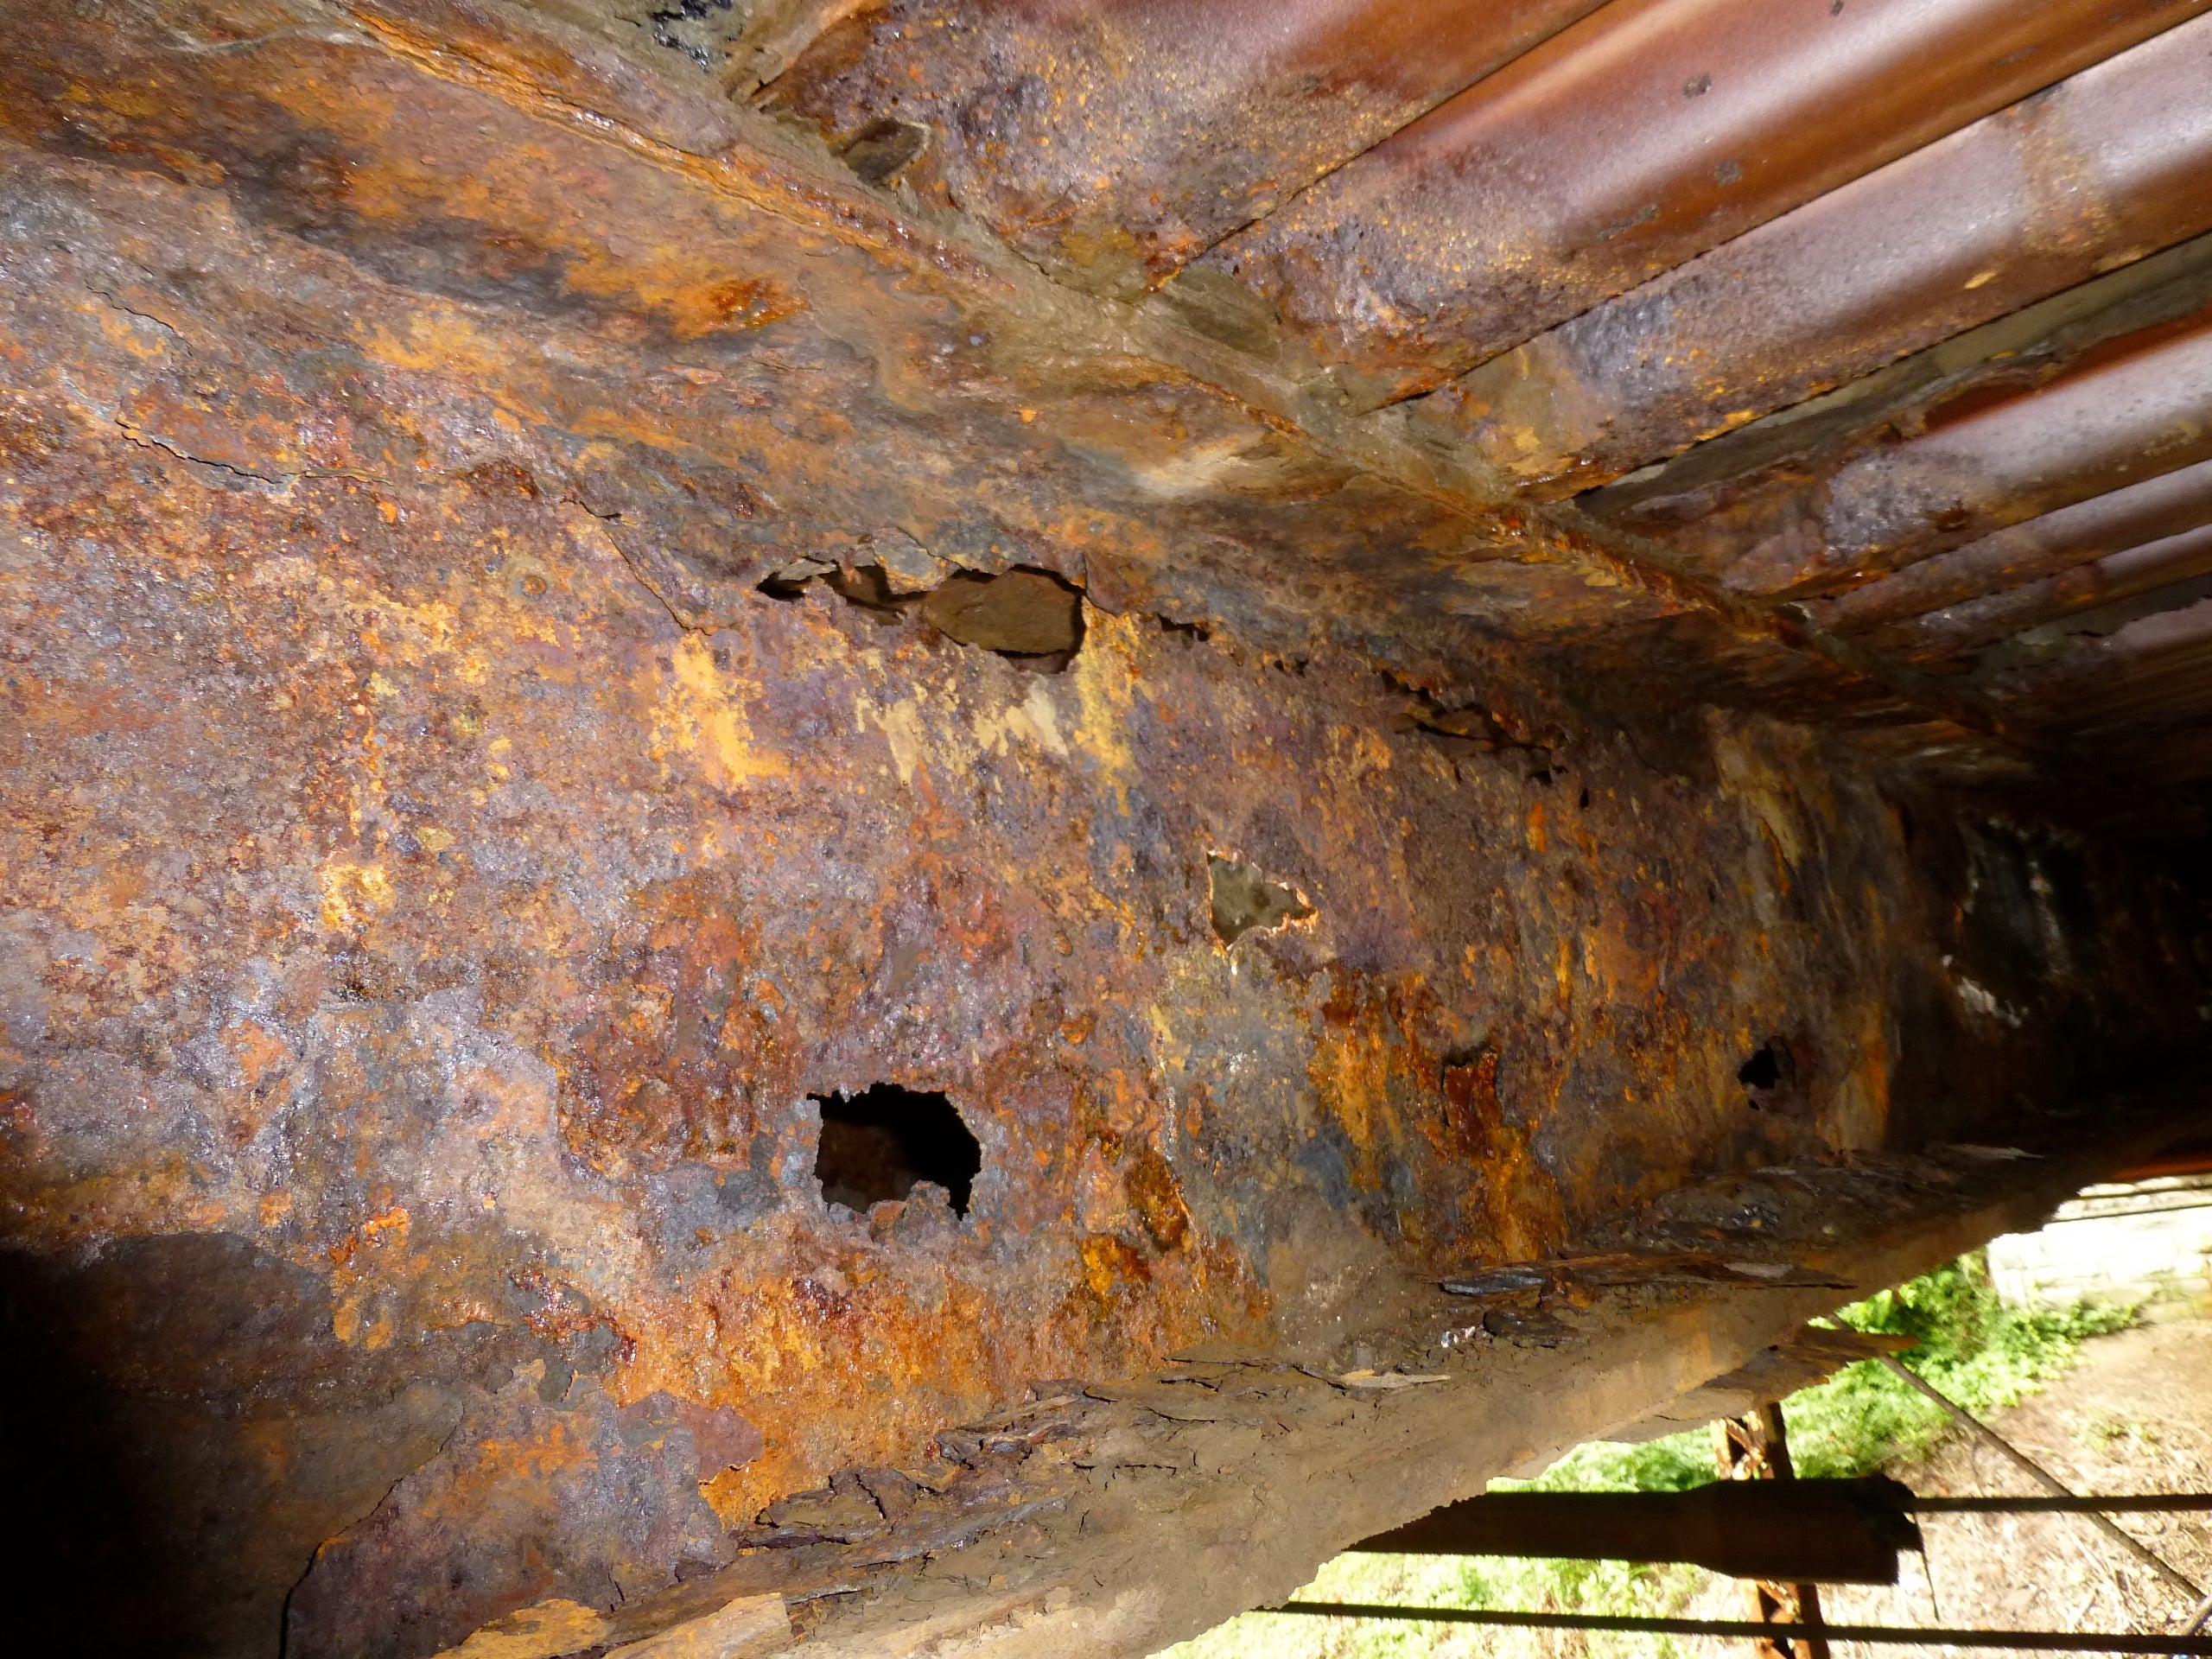 Willow Grove Ave Bridge corrosion, photo courtesy of the Streets Dept.